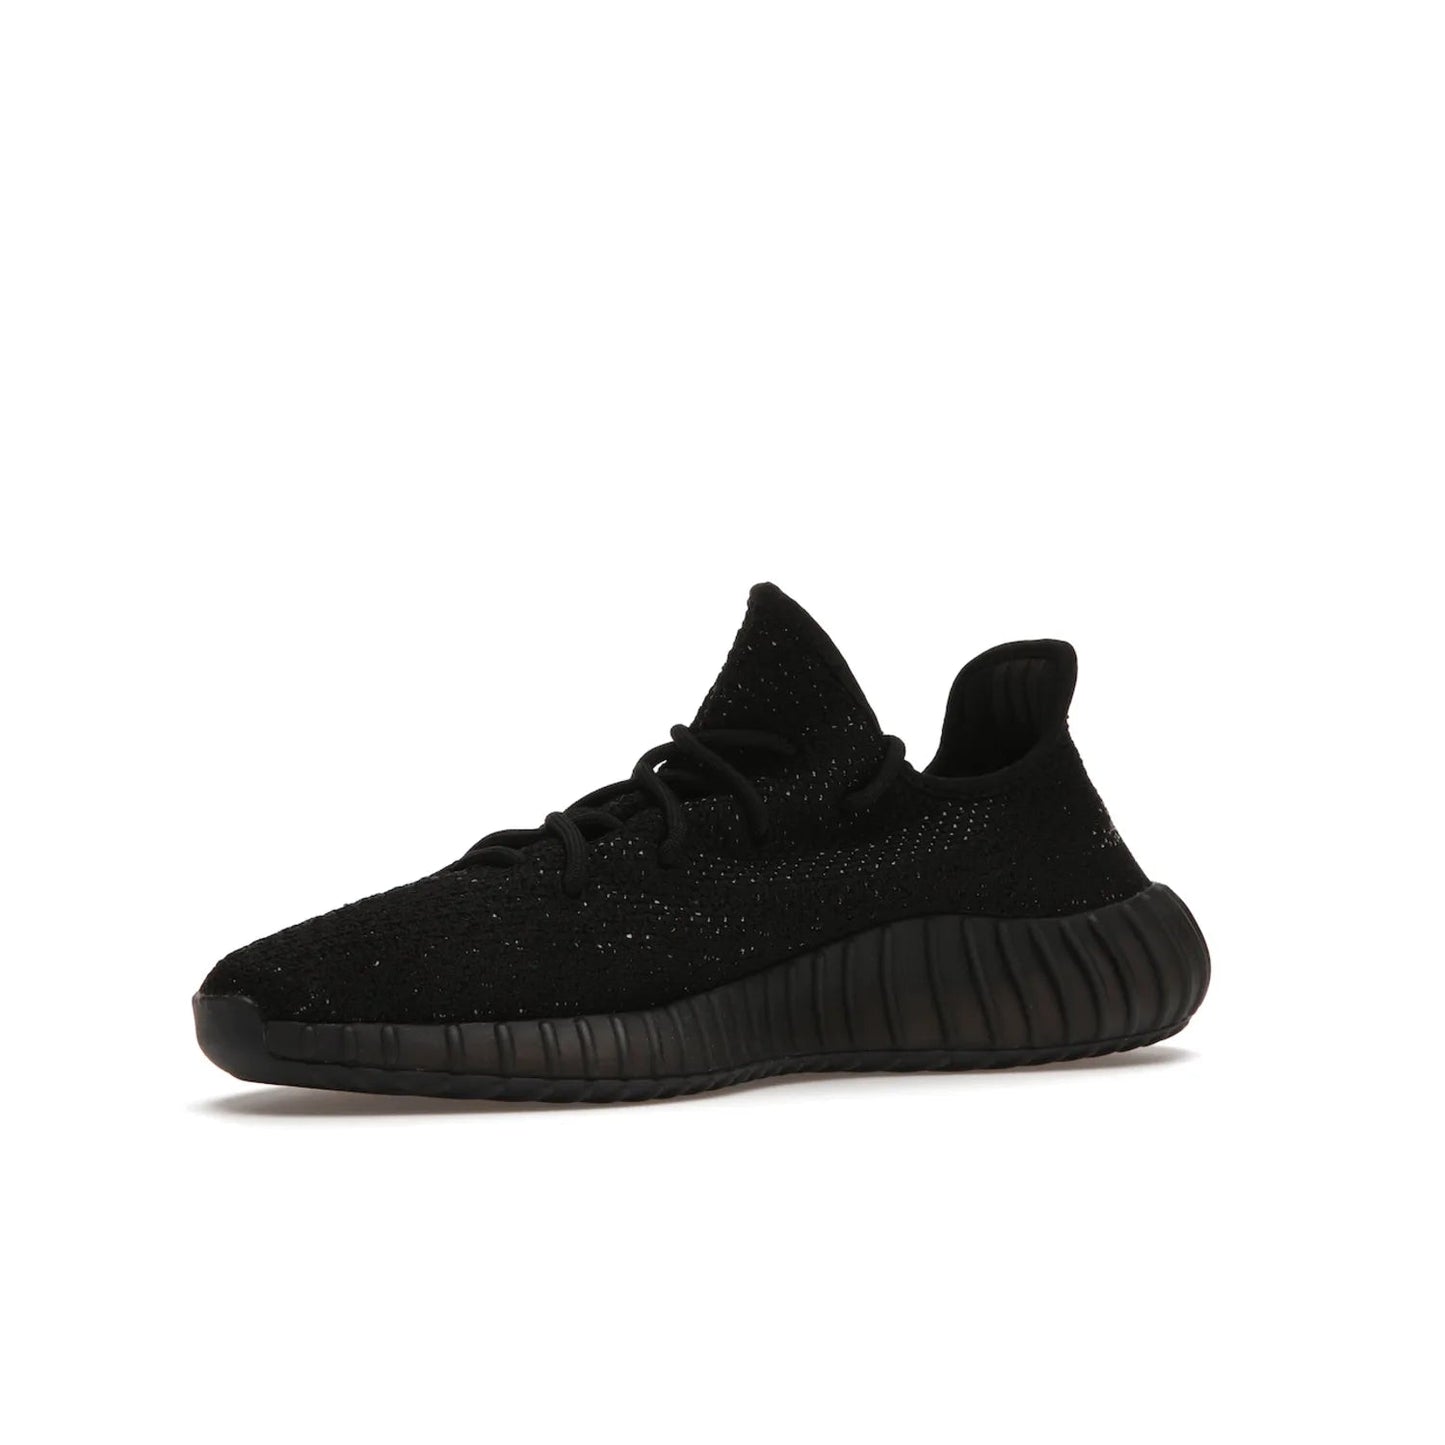 adidas Yeezy Boost 350 V2 Core Black White (2016/2022) - Image 16 - Only at www.BallersClubKickz.com - Stylish adidas Yeezy Boost 350 V2 in classic black with white "SPLY-350" stitched to the side stripe. Features Primeknit upper & Boost sole for comfort. Restock in March 2022.